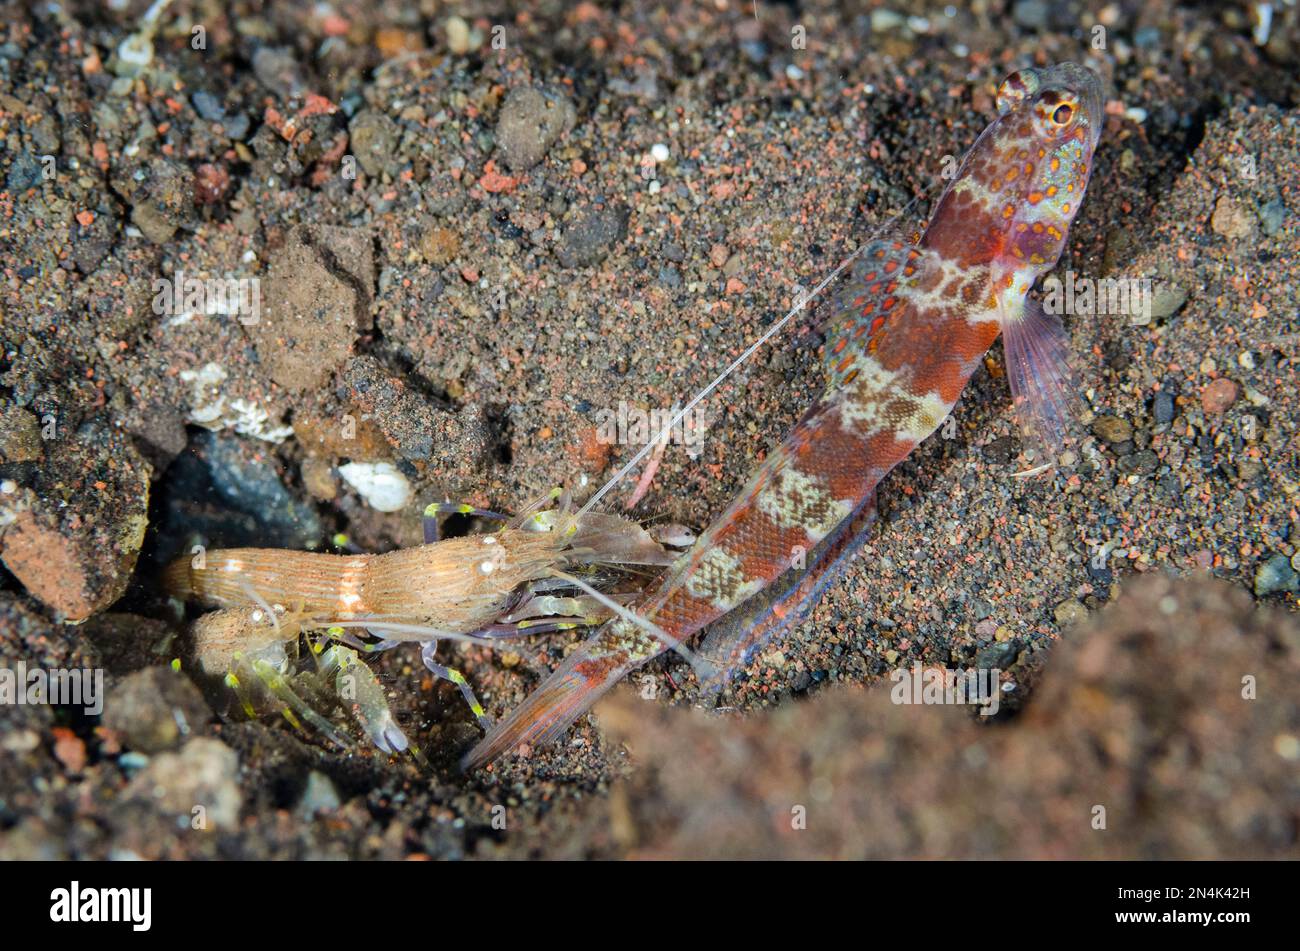 Blotchy Shrimpgoby, Amblyeleotris periophthalma, with pair of Snapping Shrimps, Alpheus sp, cleaning hole, Pong Pong dive site, Seraya, Kubu district, Stock Photo